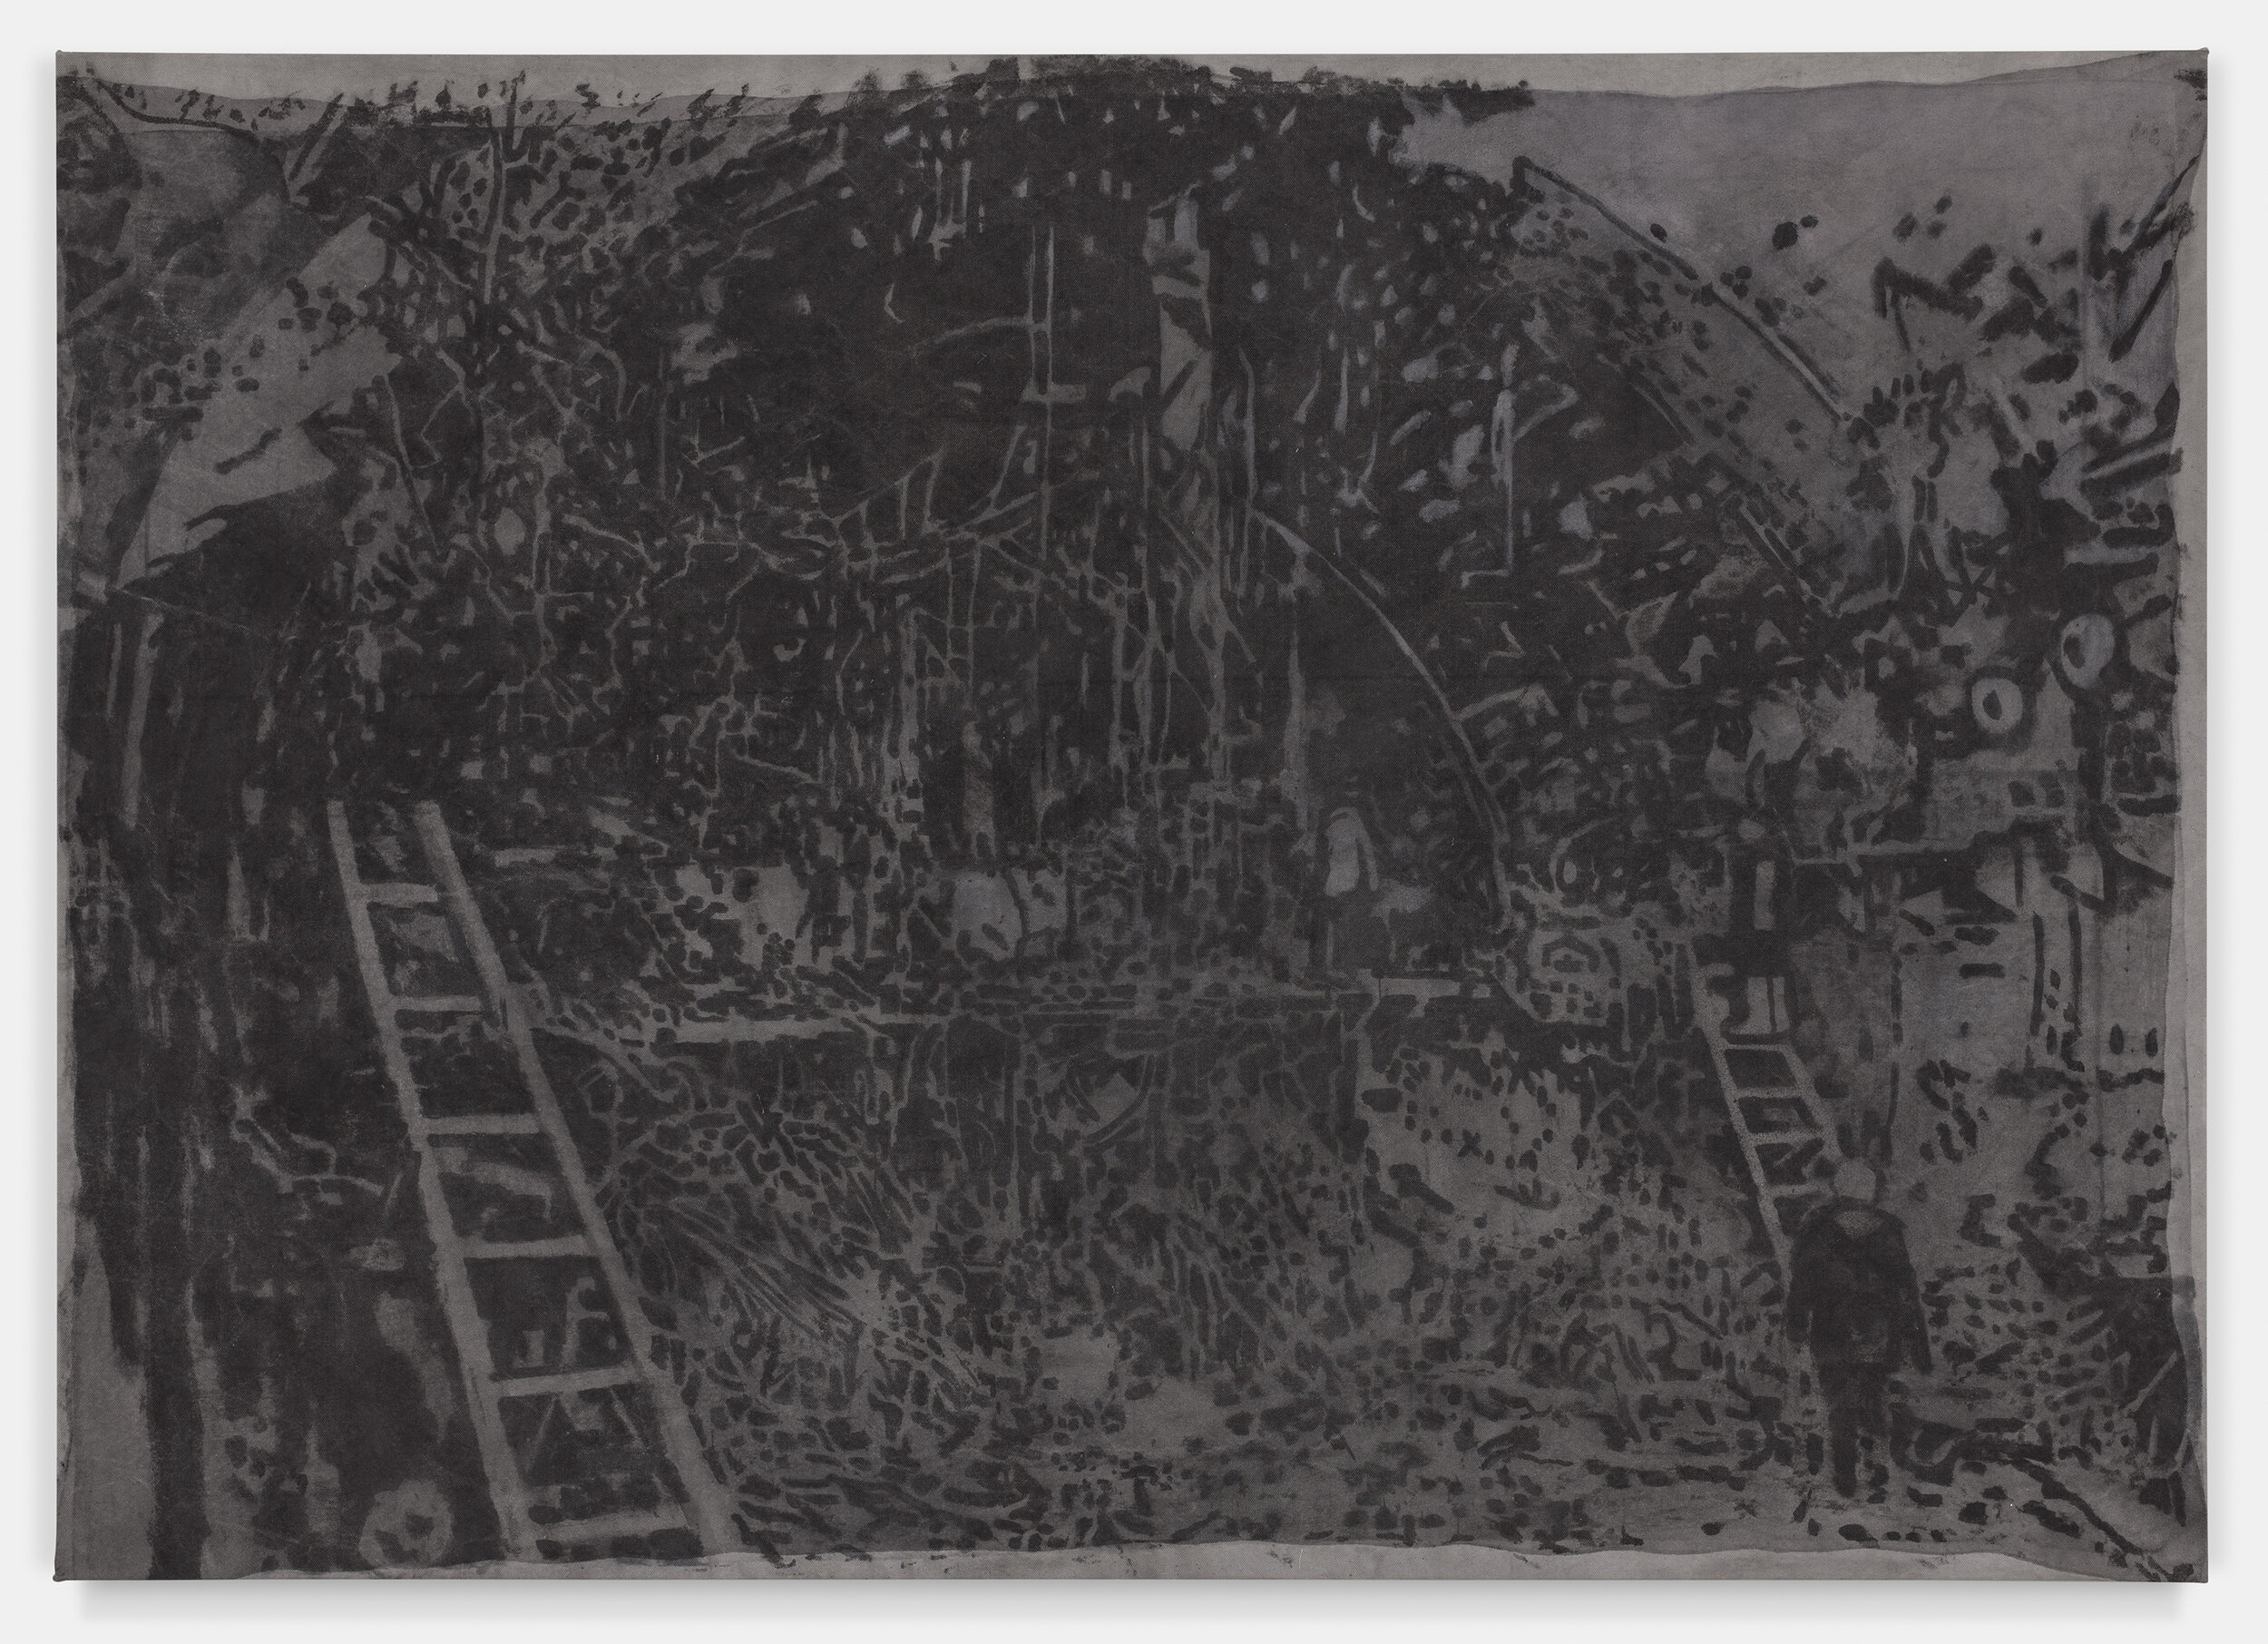   Kursk , 2016 graphite on canvas, exposed to natural elements 53 × 75 inches (135 × 190.5 cm) 